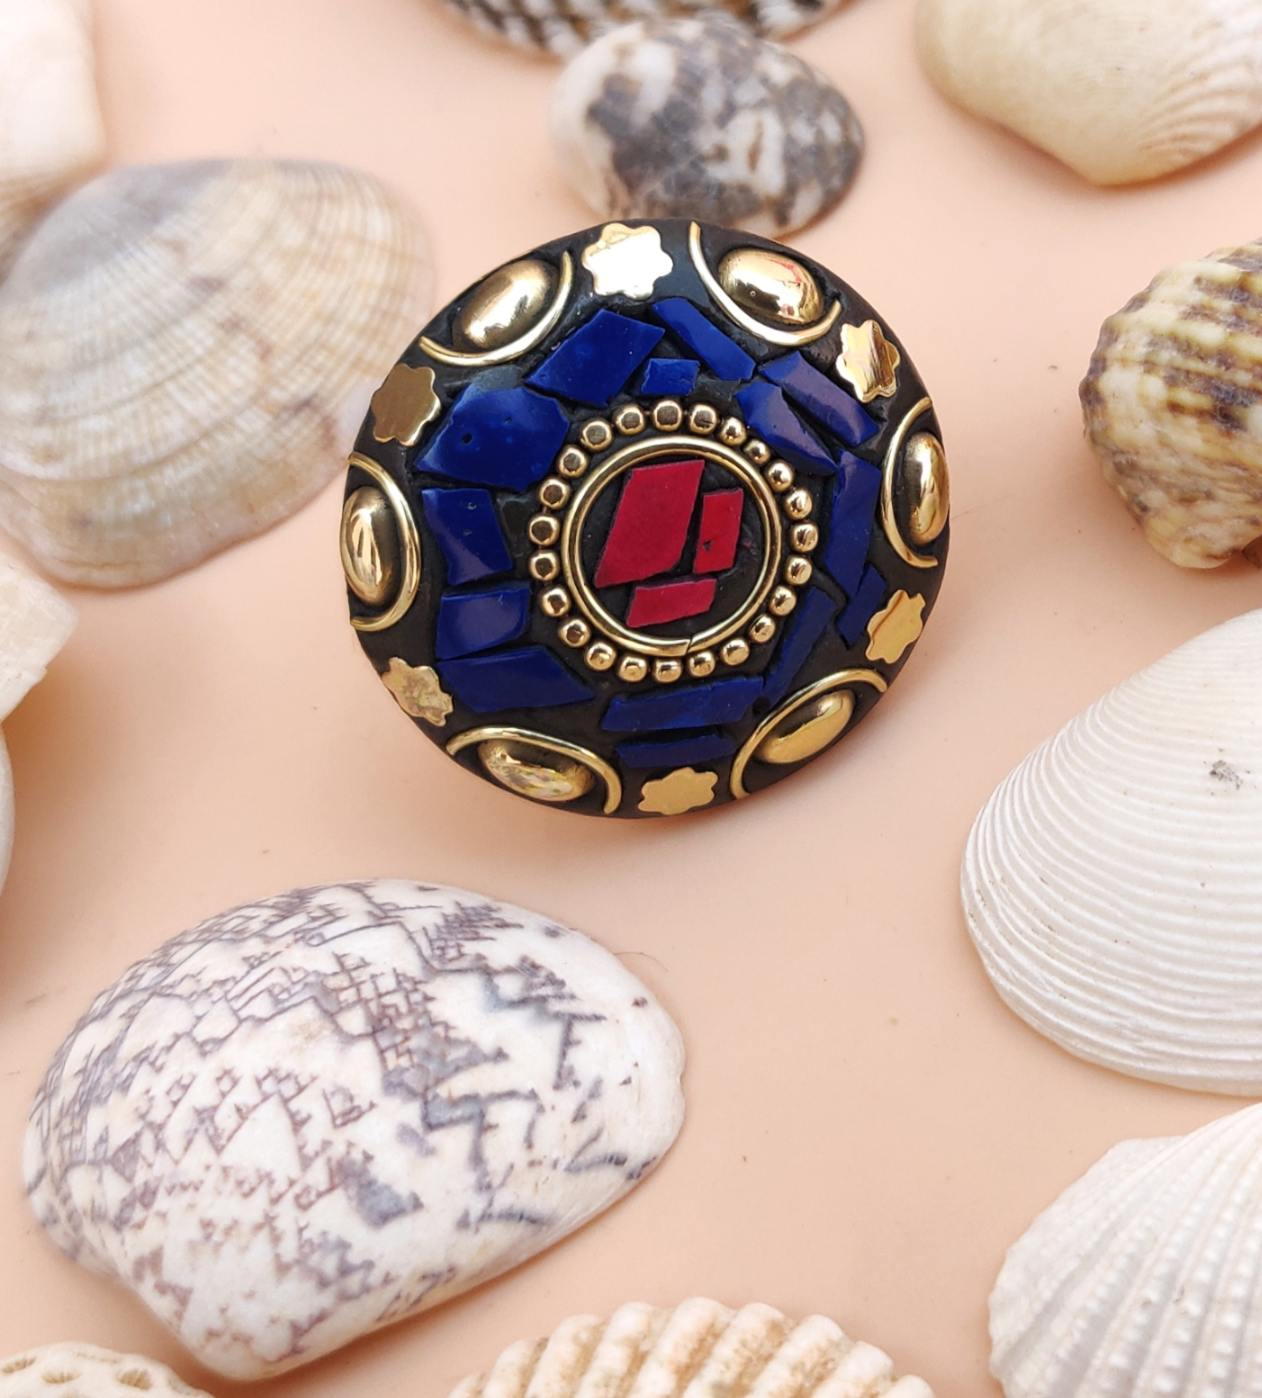 Tribal round ring in blue and golden